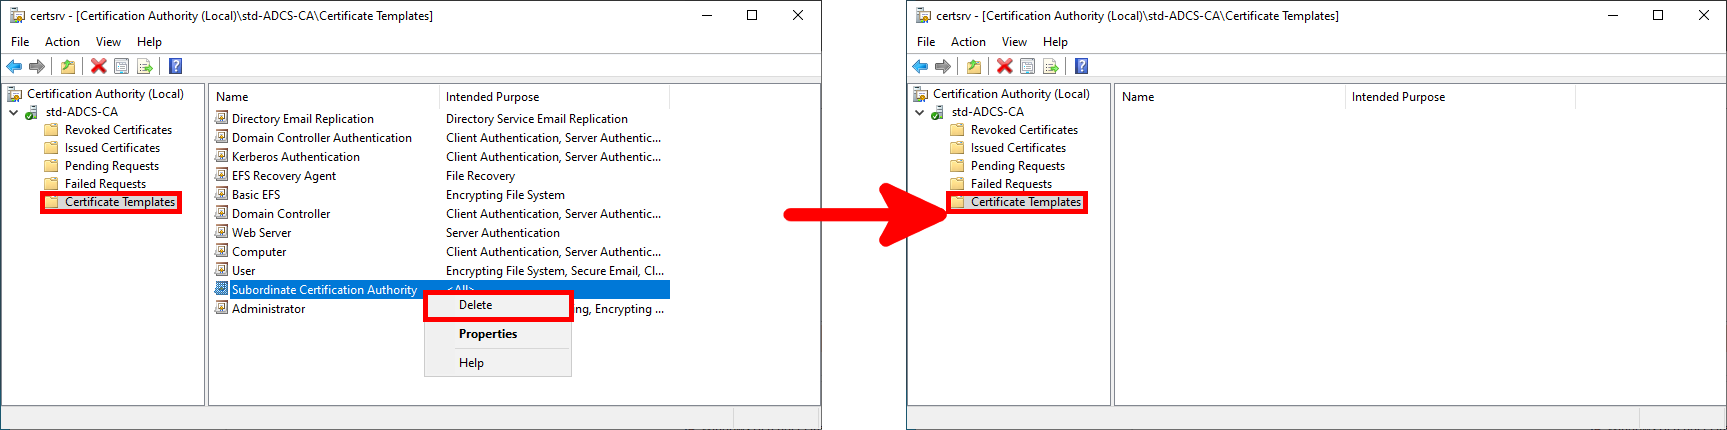 ADCS configuration tool windows when deleting certificate creation templates